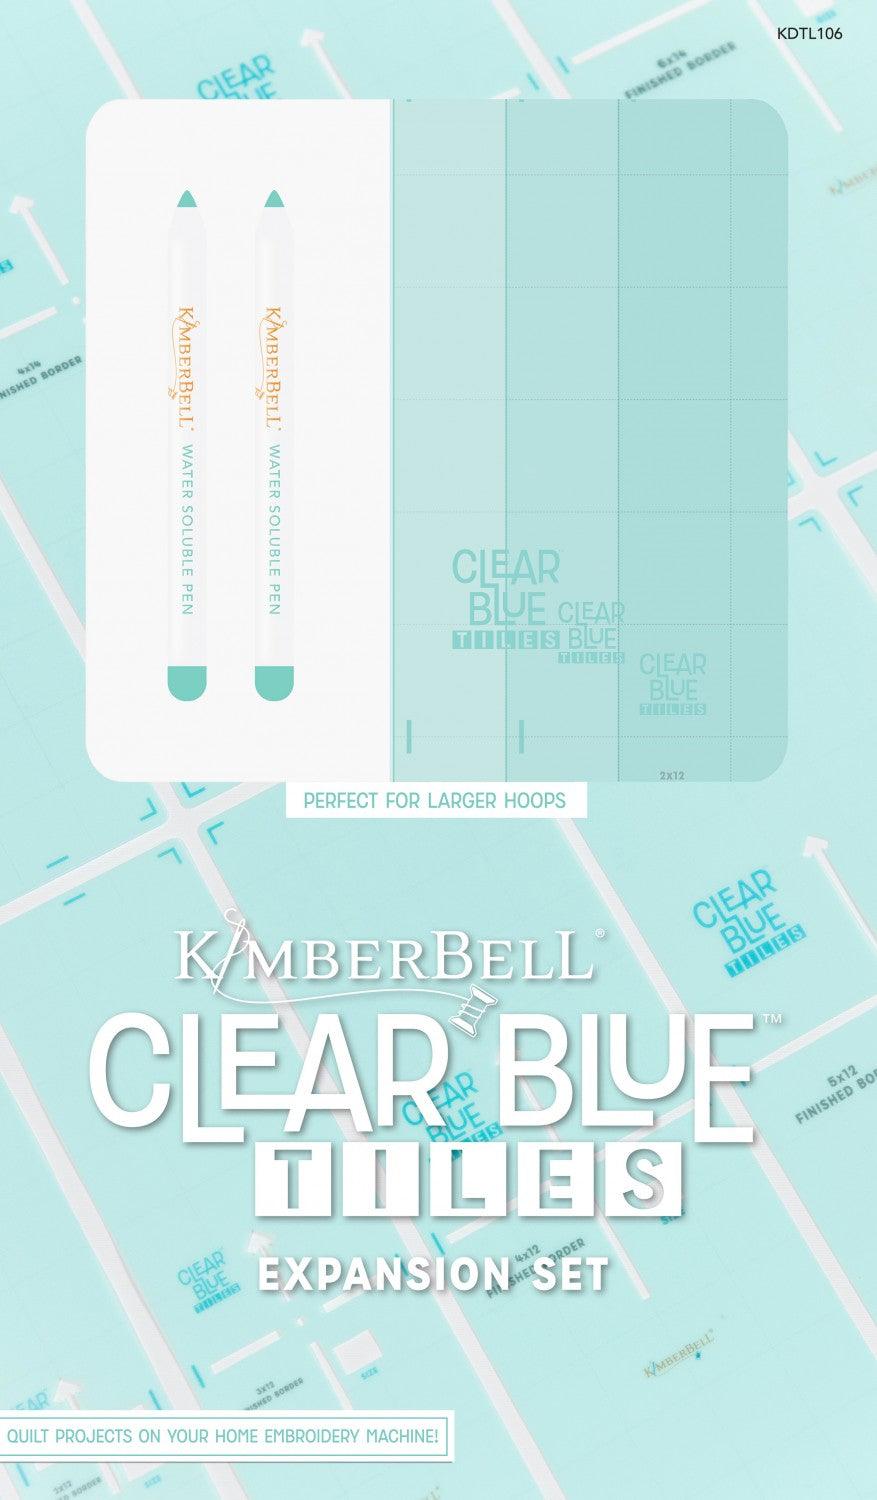 Clear Blue Tiles - Expansion Set - Kimberbell - Kawartha Quilting and Sewing LTD.